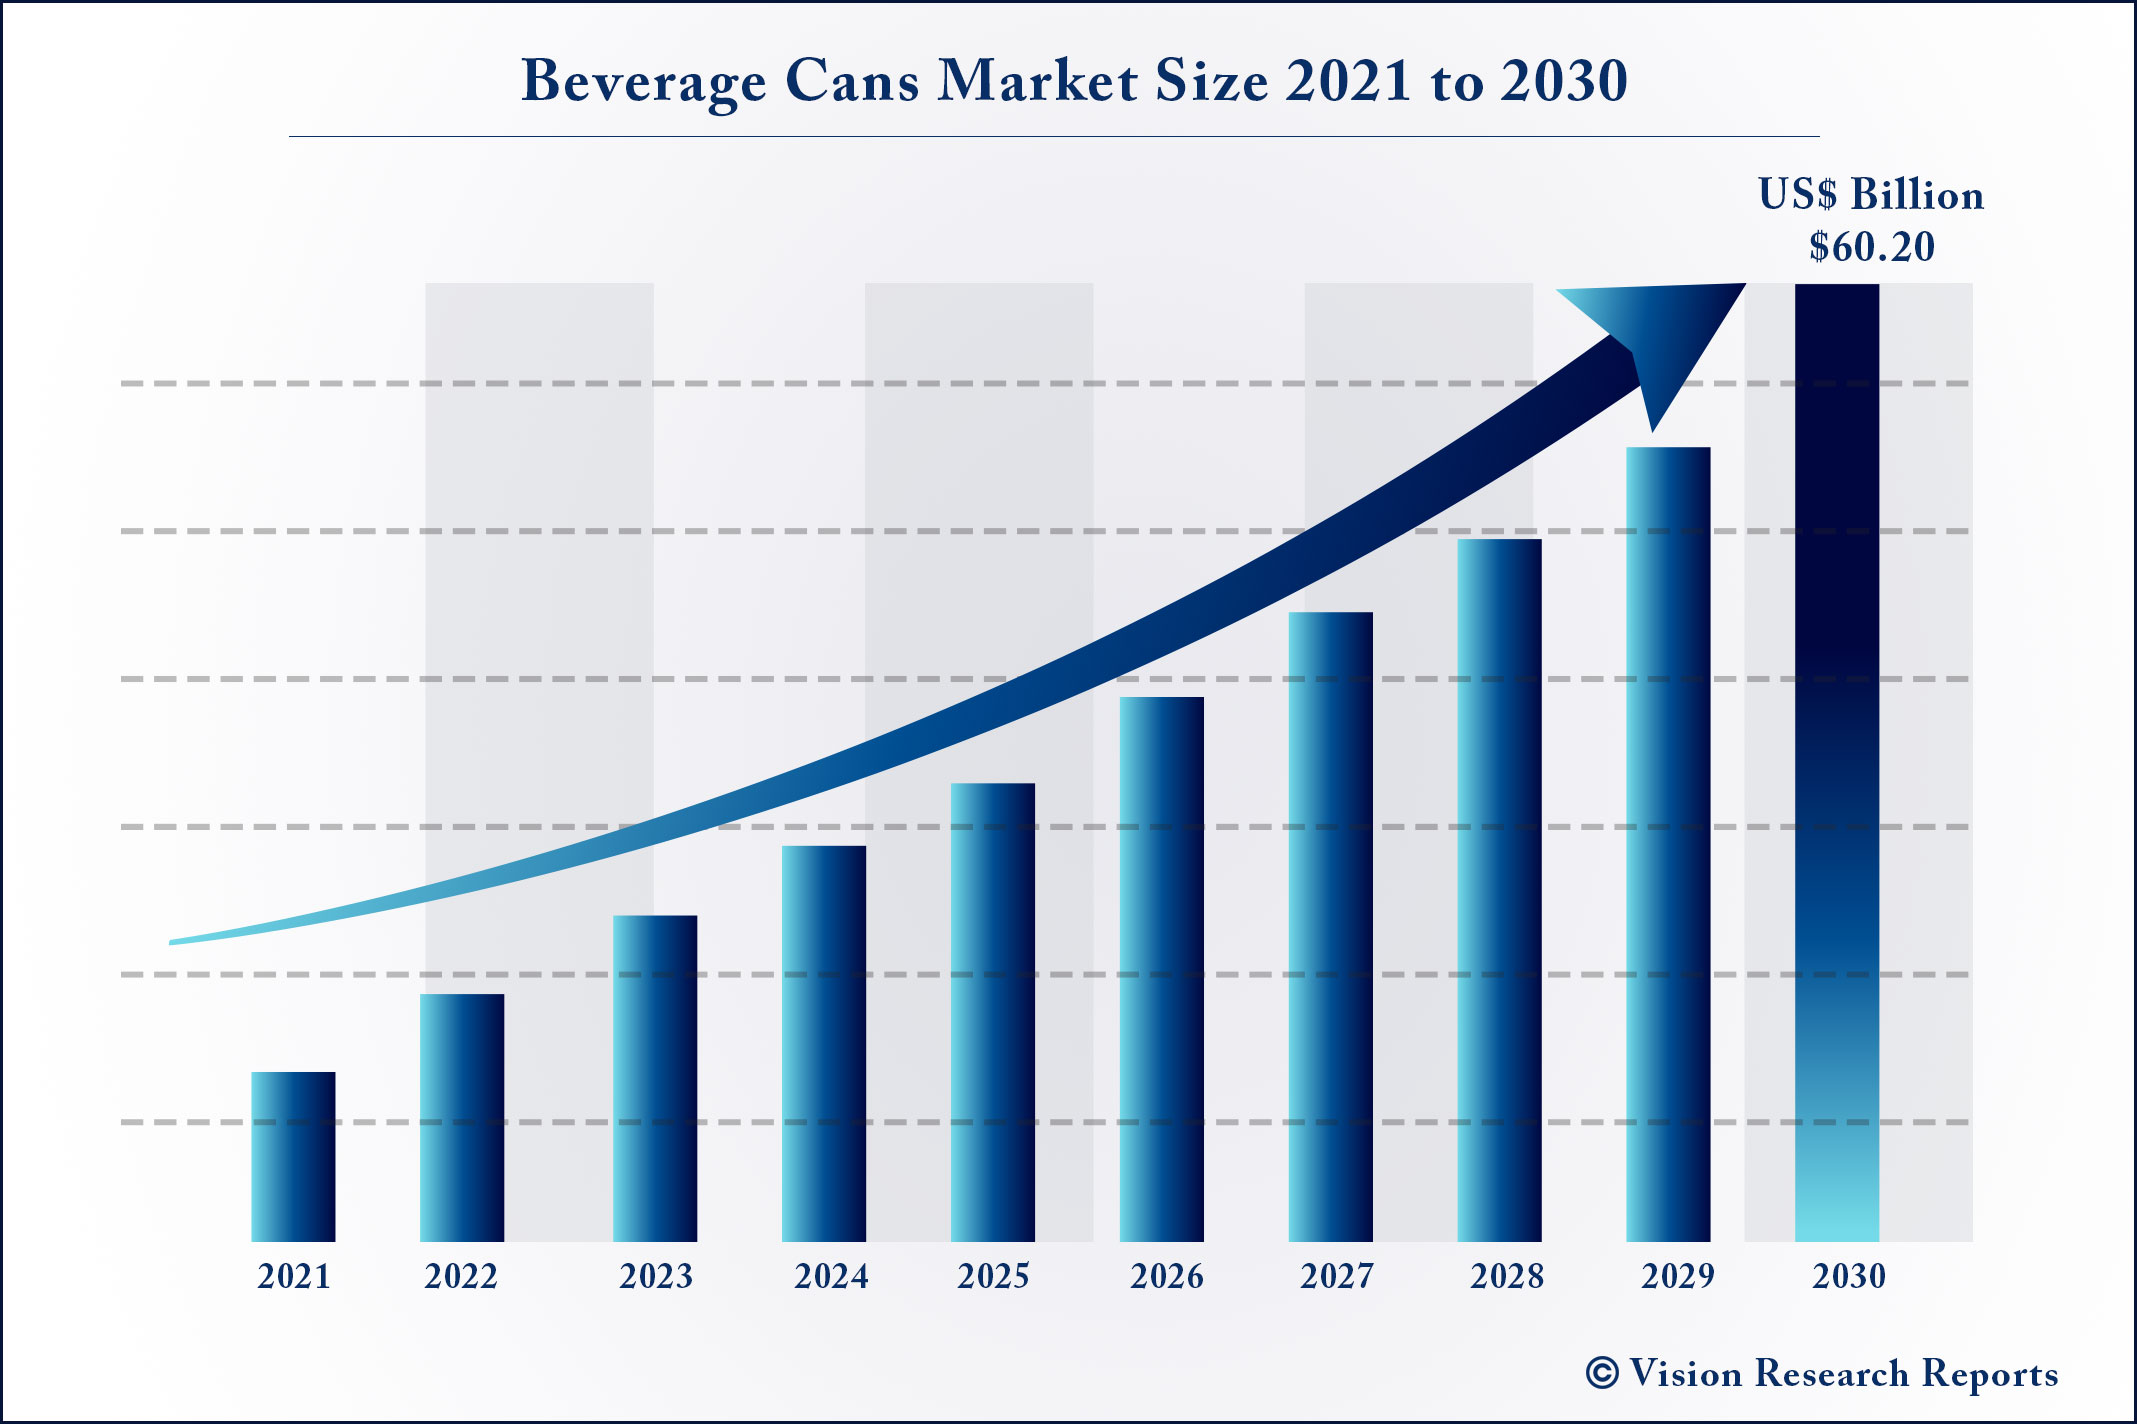 Beverage Cans Market Size 2021 to 2030